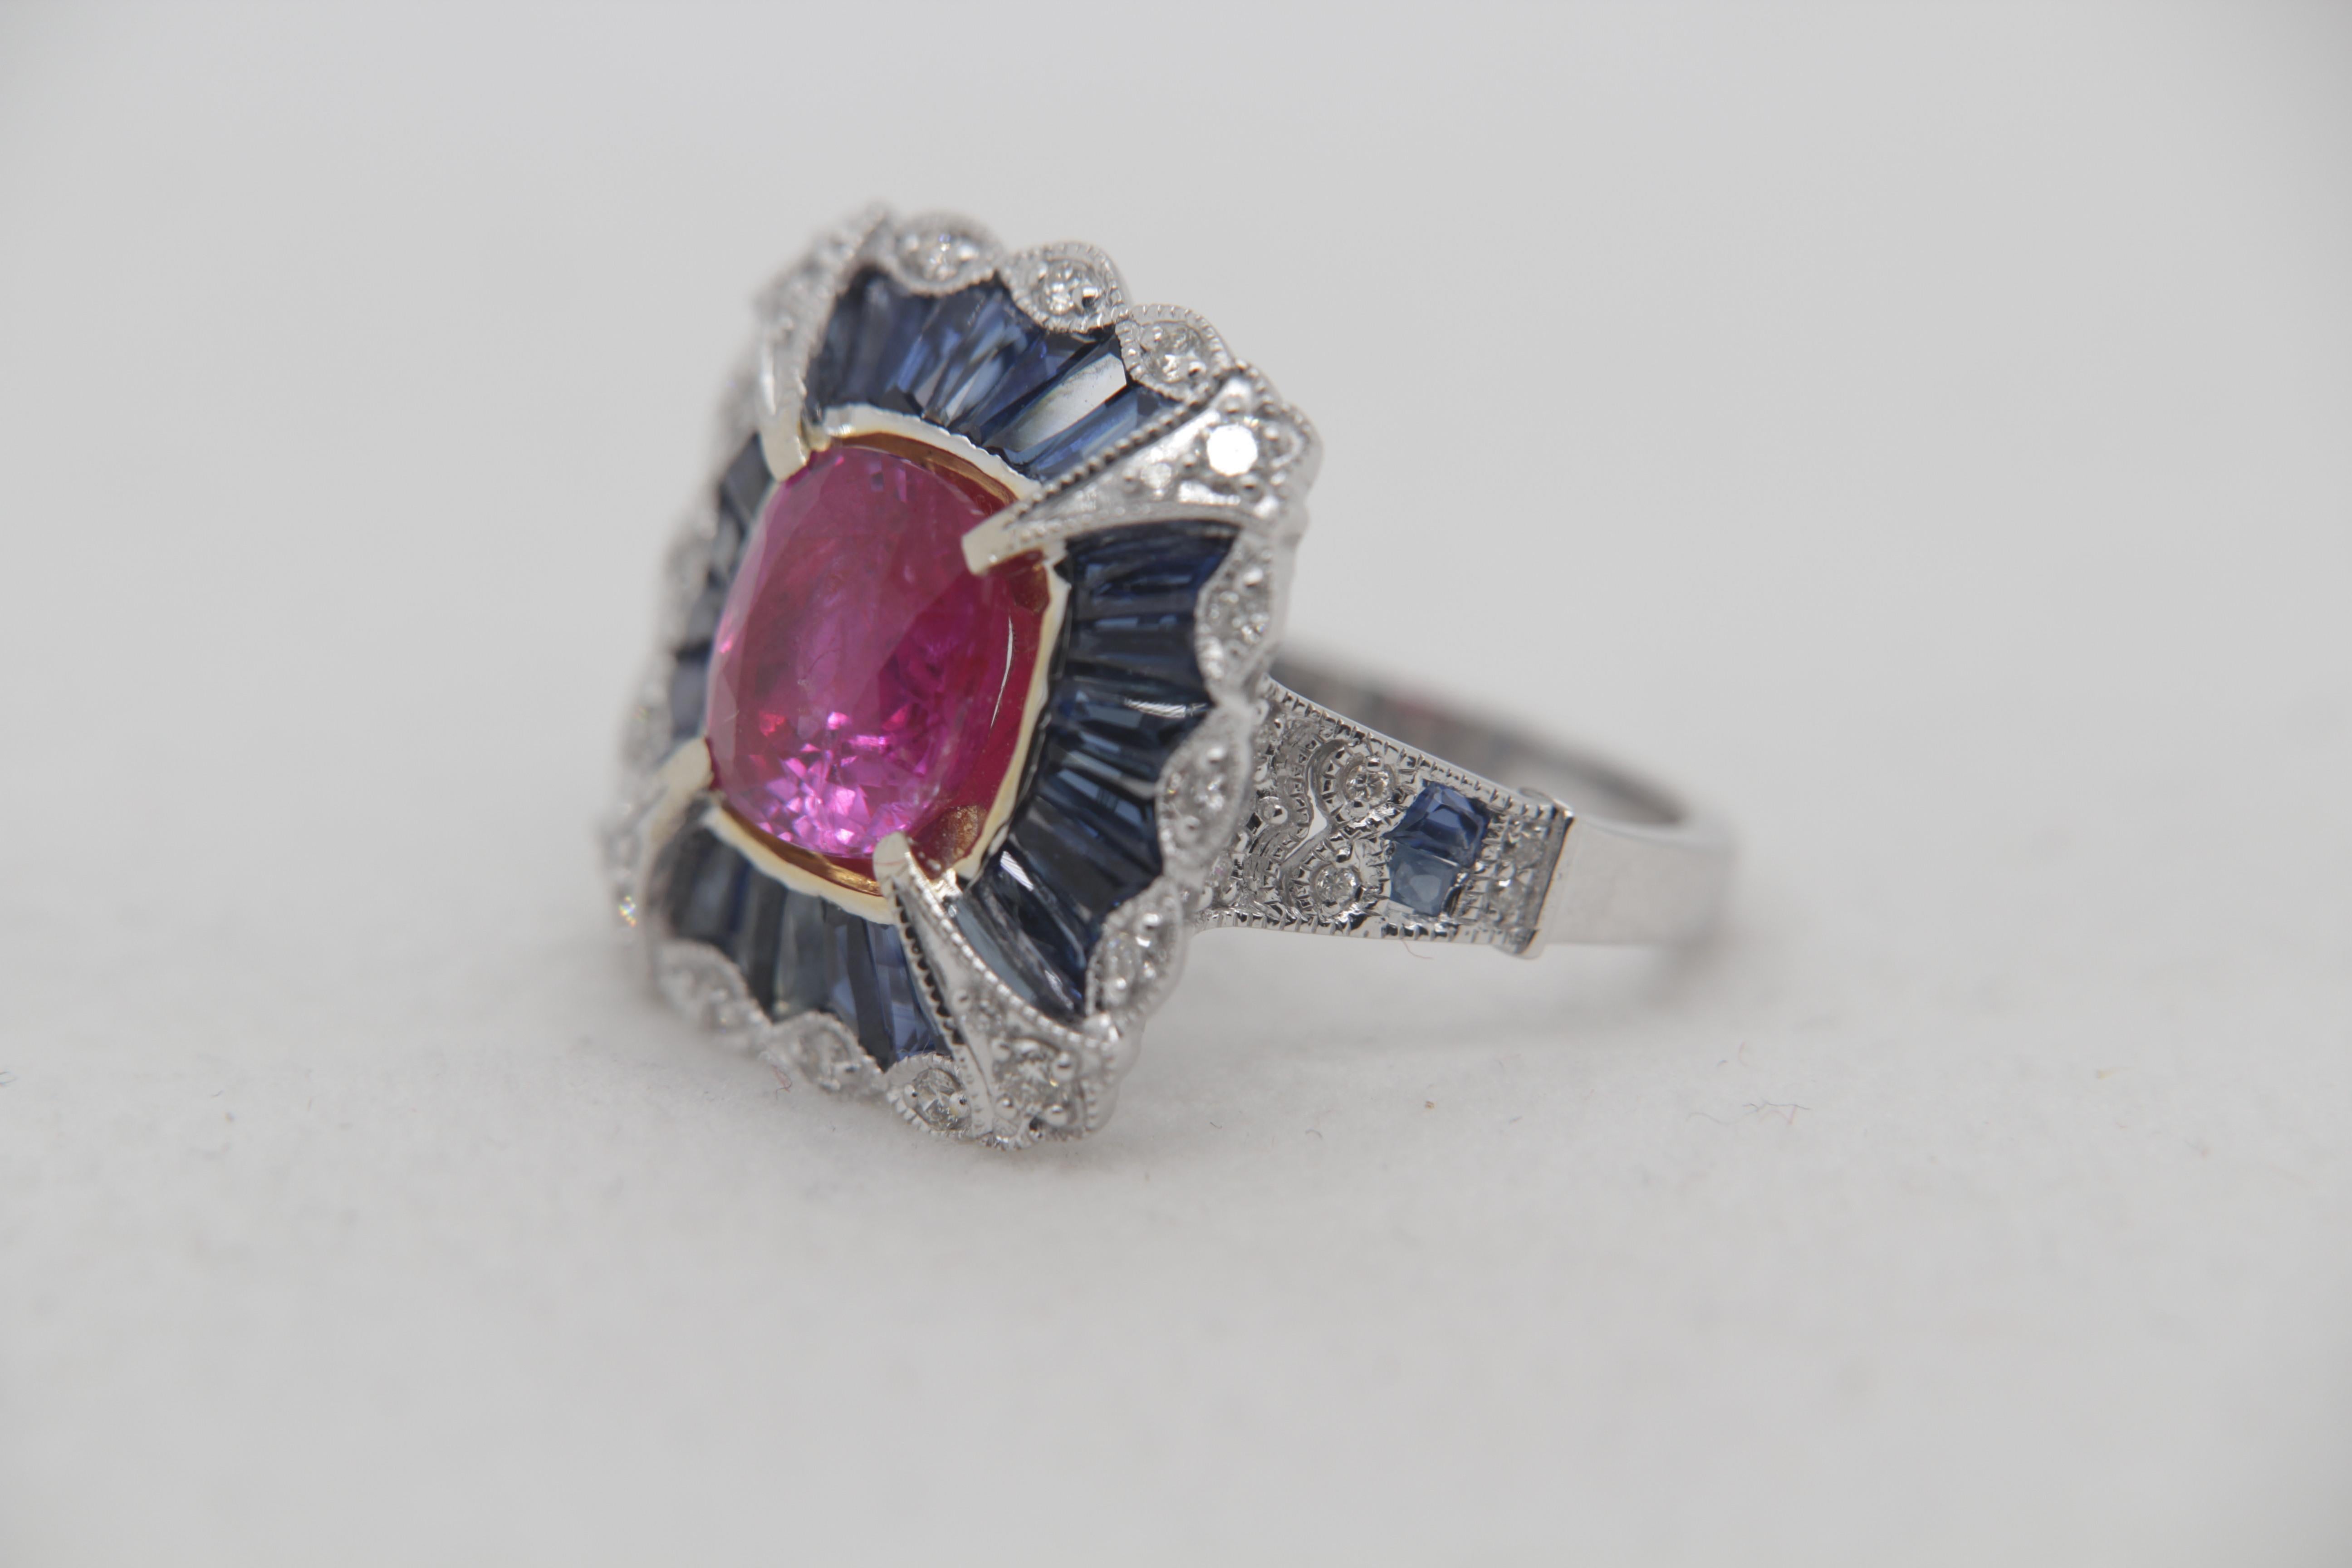 A brand new 3.11 carat Burmese ruby ring mounted with diamonds in 18 Karat gold. The ruby is of weight 3.11 carat and is certified by AGL (Thai) as natural, no heat, and 'Purplish Red'. The total diamond weight is 0.29 carat and blue sapphire weight